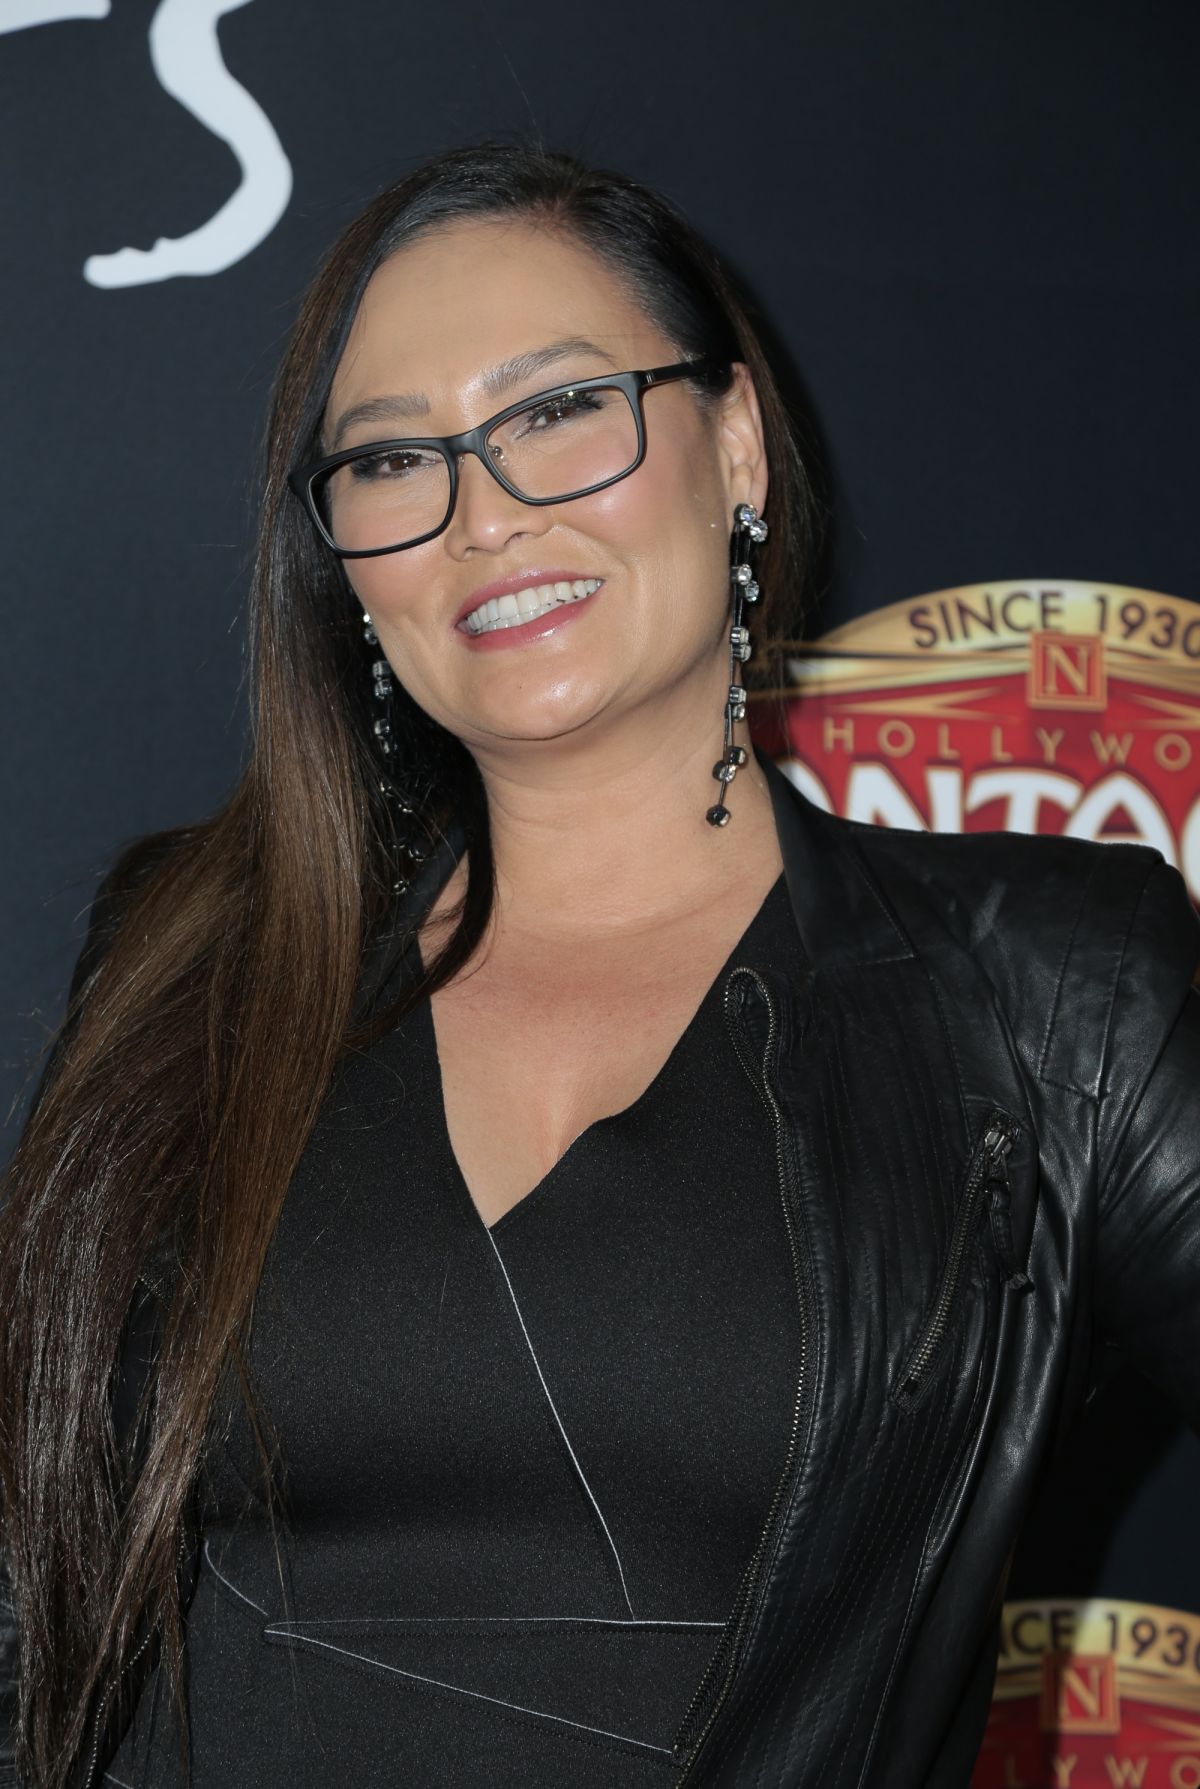 TIA CARRERE at Cats Opening Night Performance in Hollywood 02/27/2019.